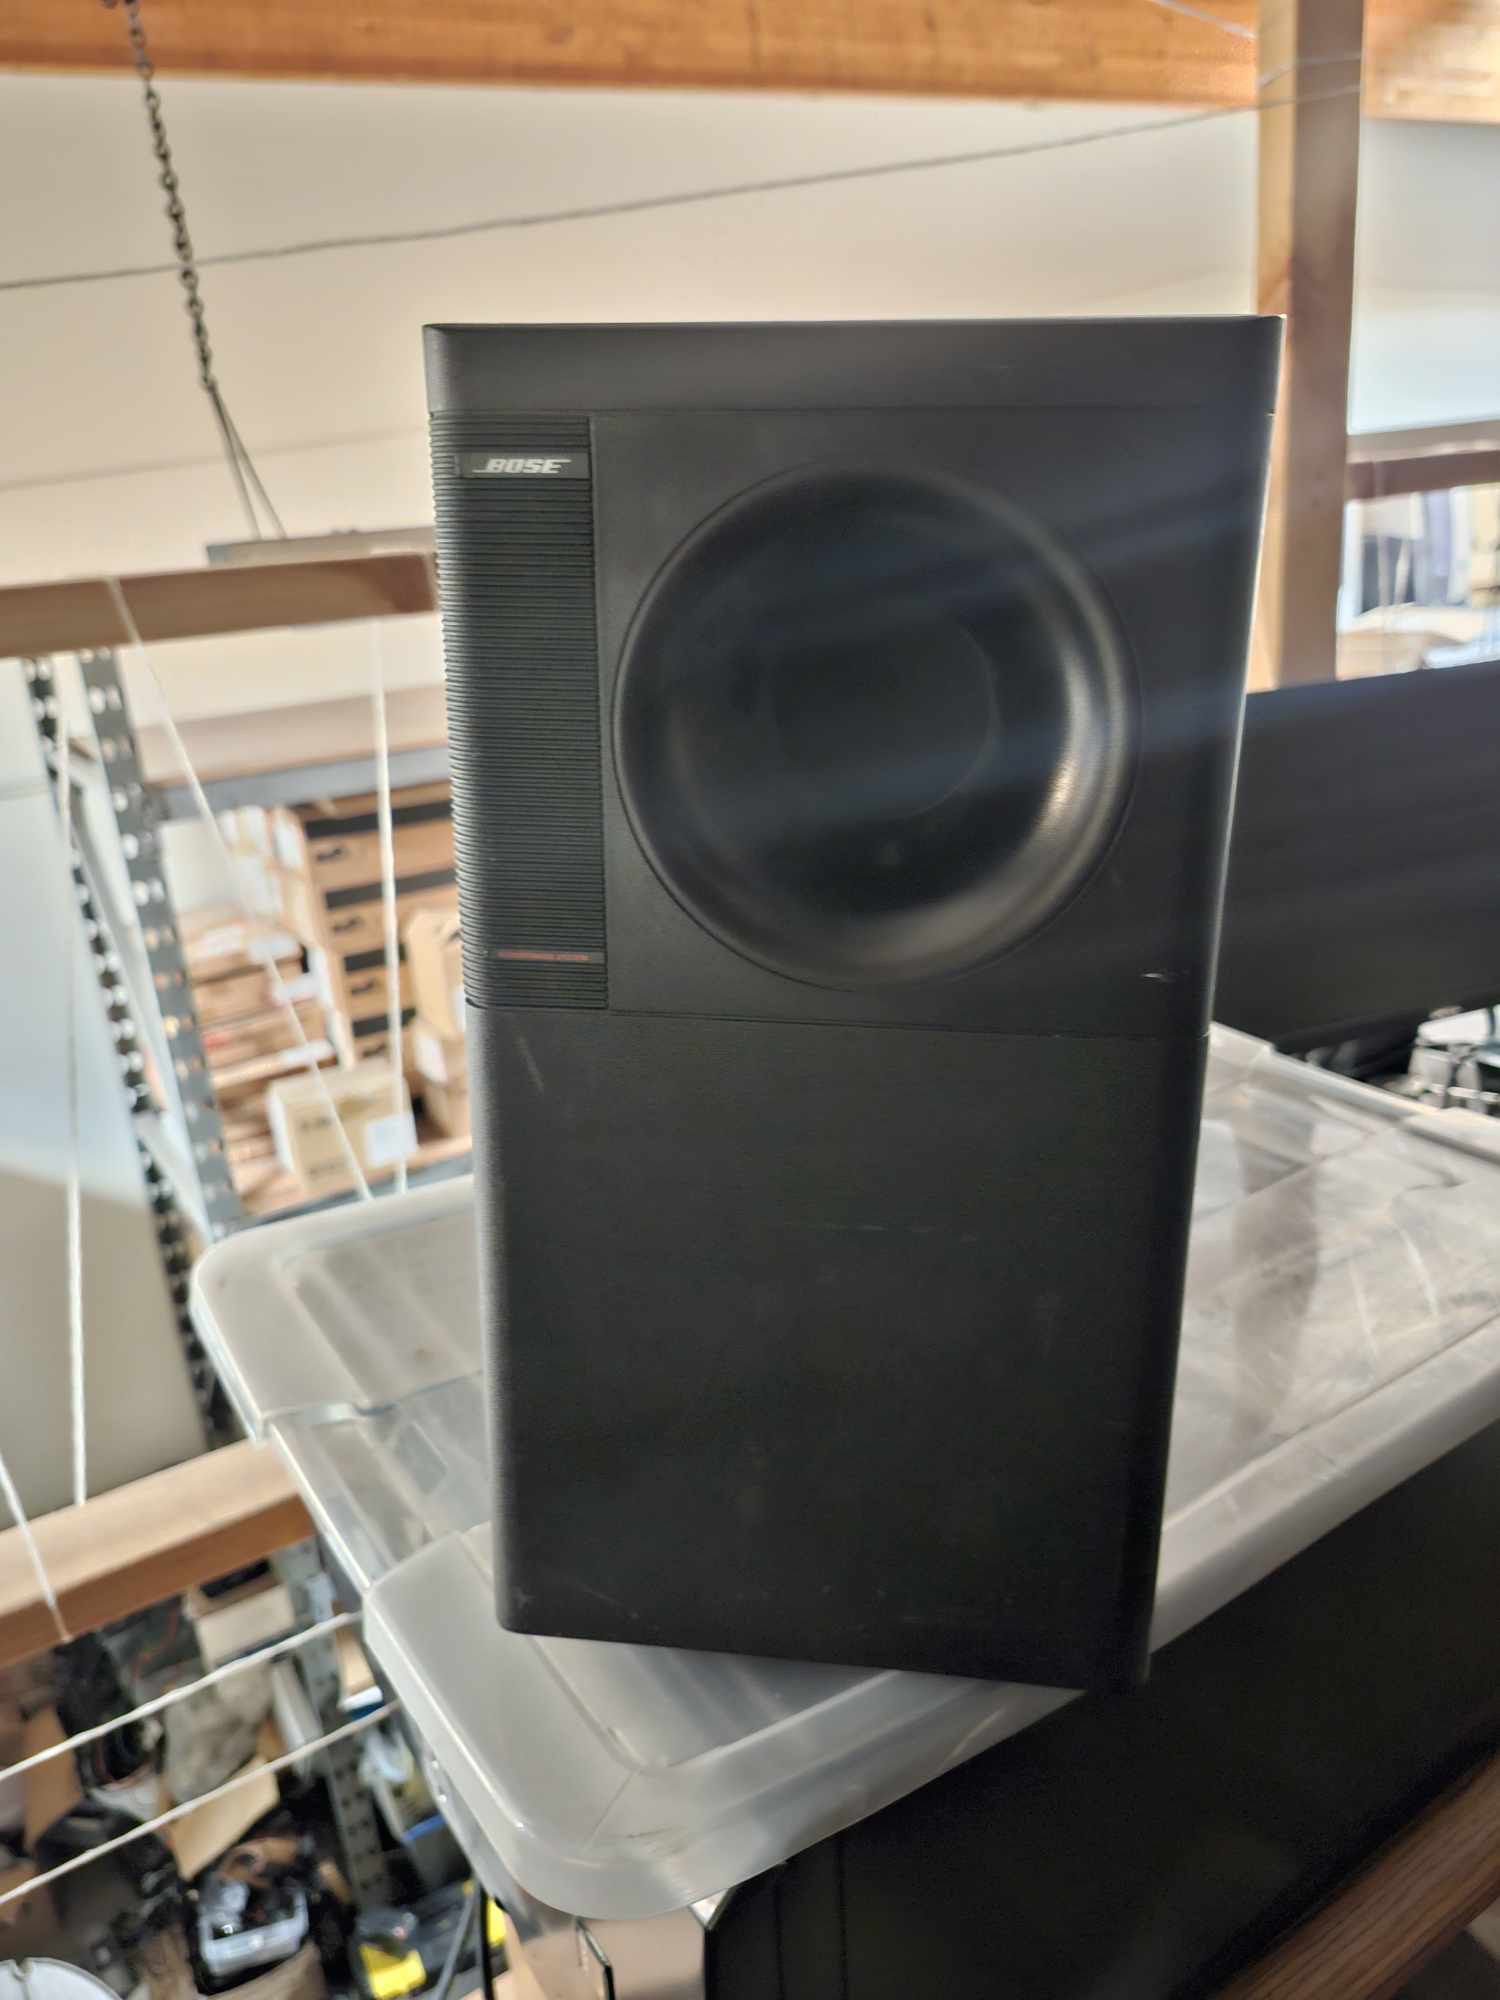 Bose Acoustimass 900 Black Powered Subwoofer Bass Speaker - Tested and Working